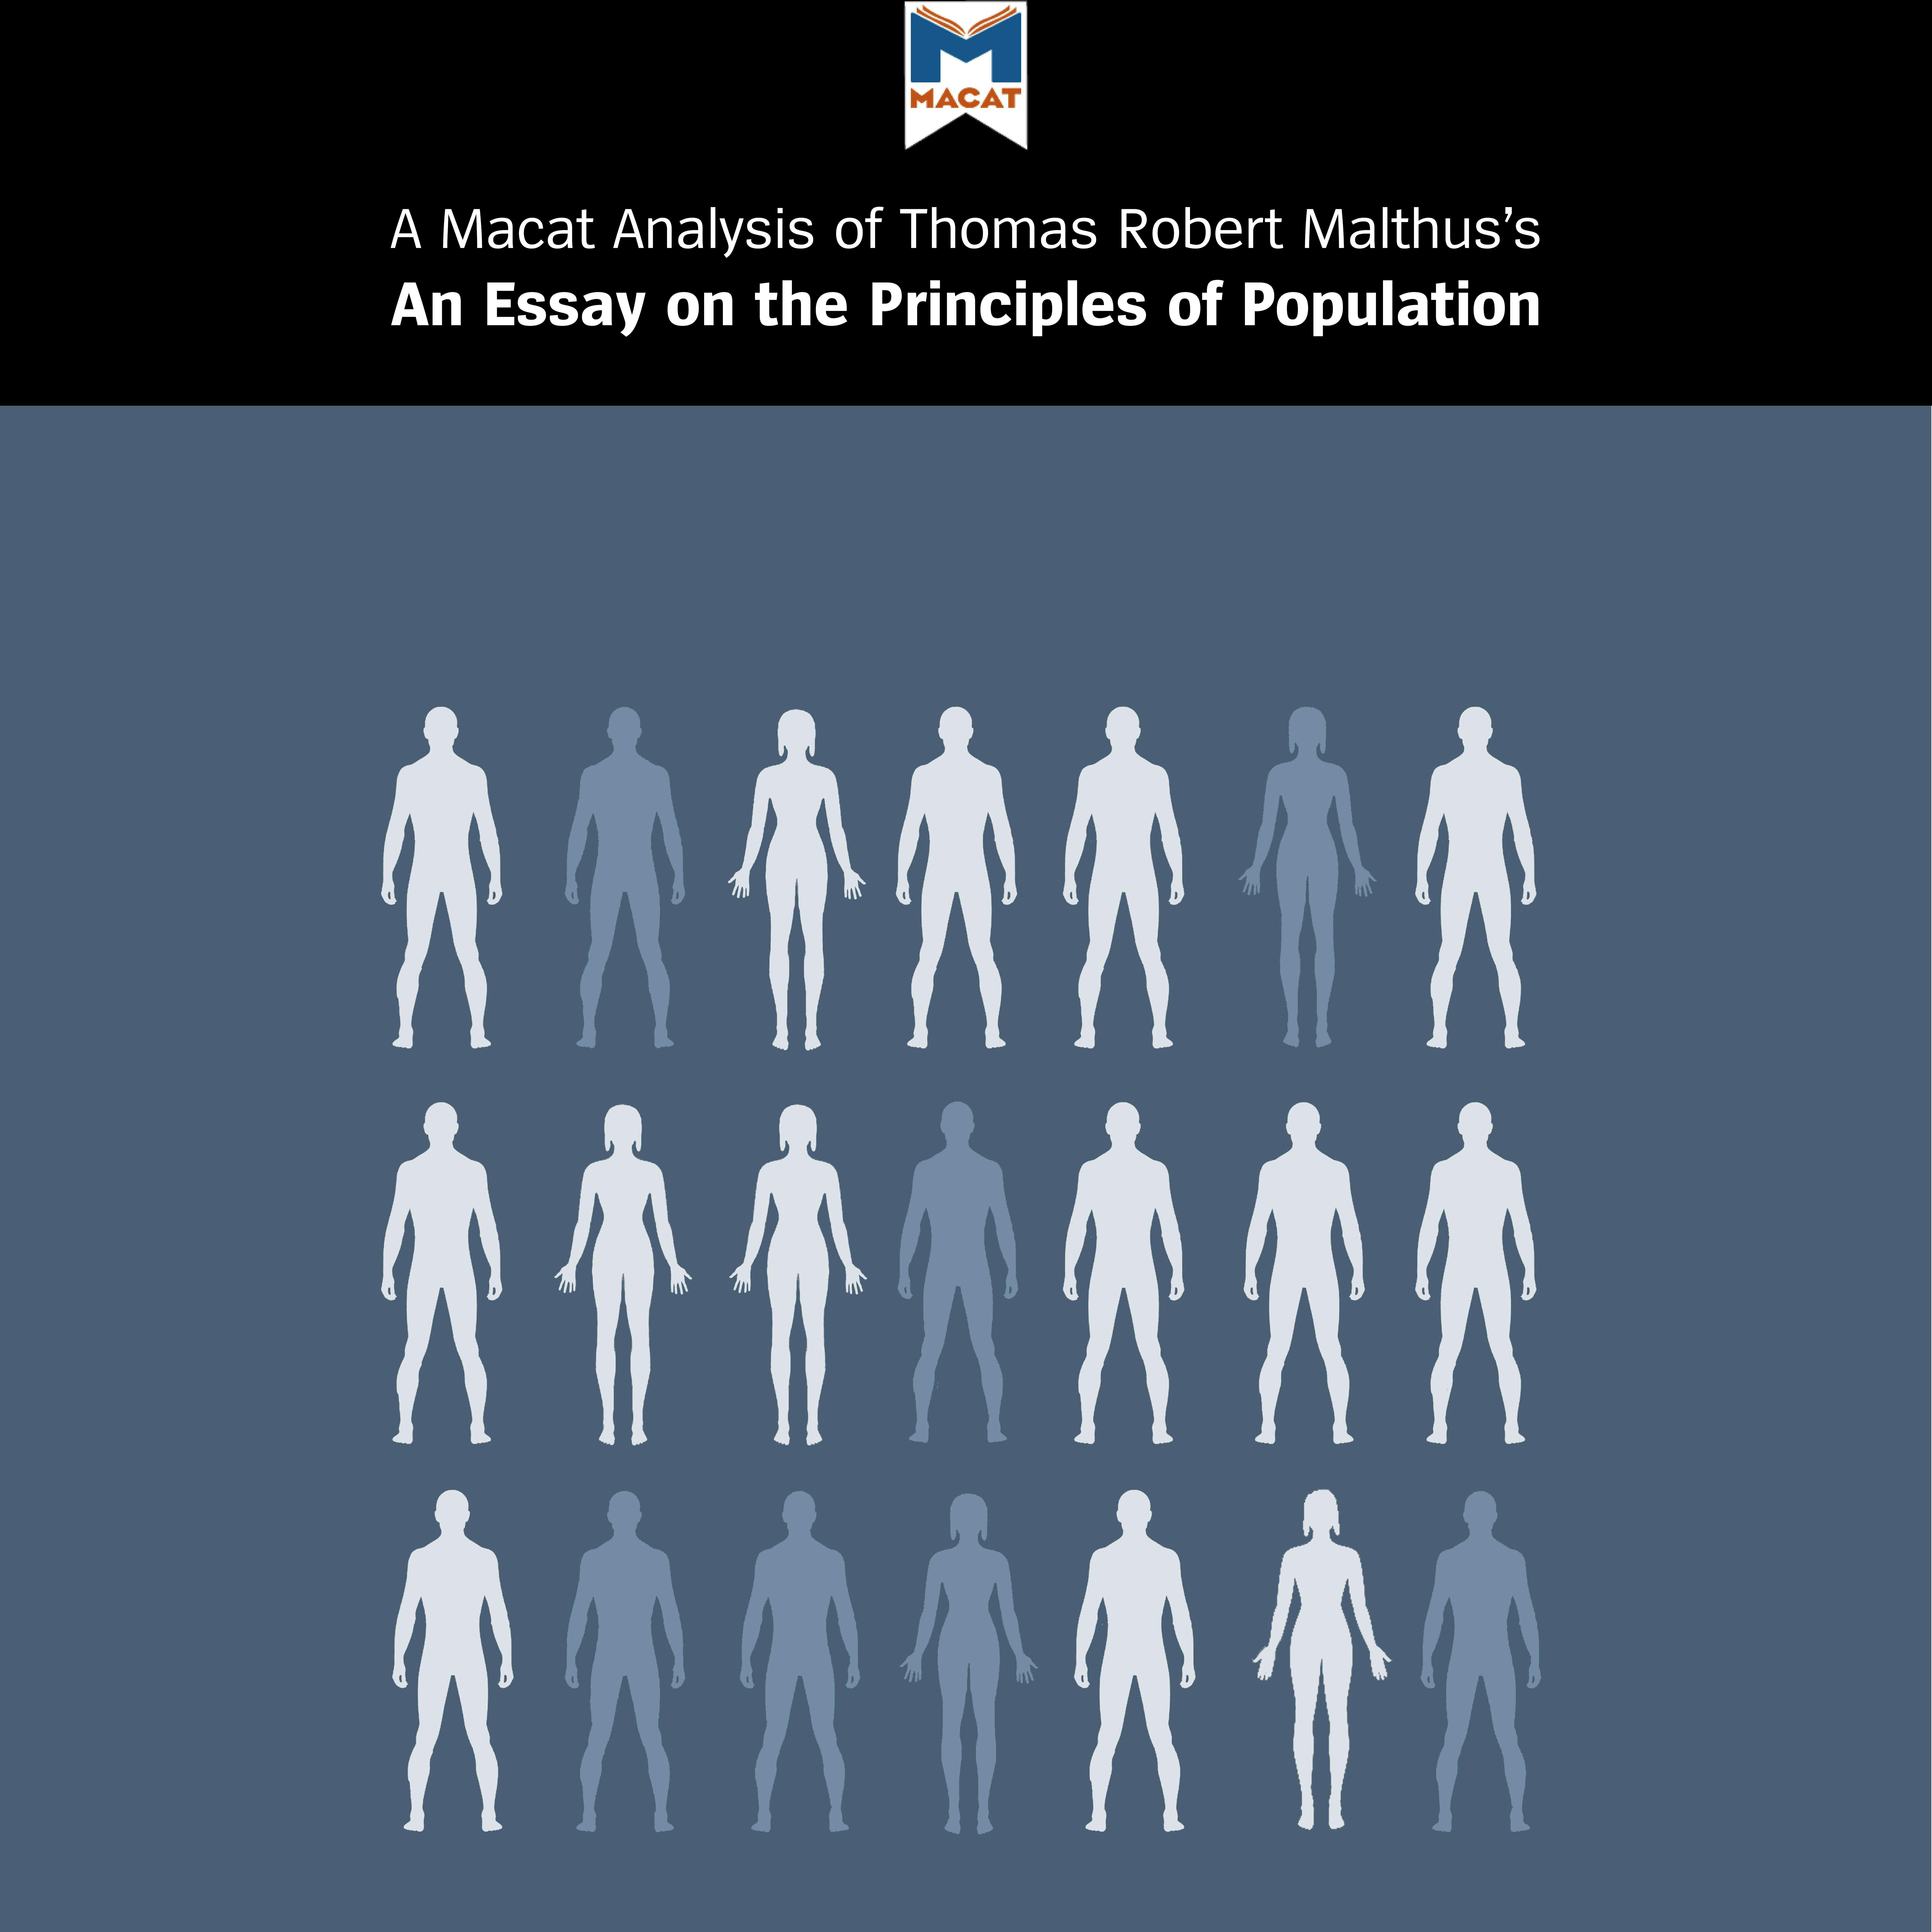 A Macat Analysis of Thomas Robert Malthus's An Essay on the Principle of Population - undefined